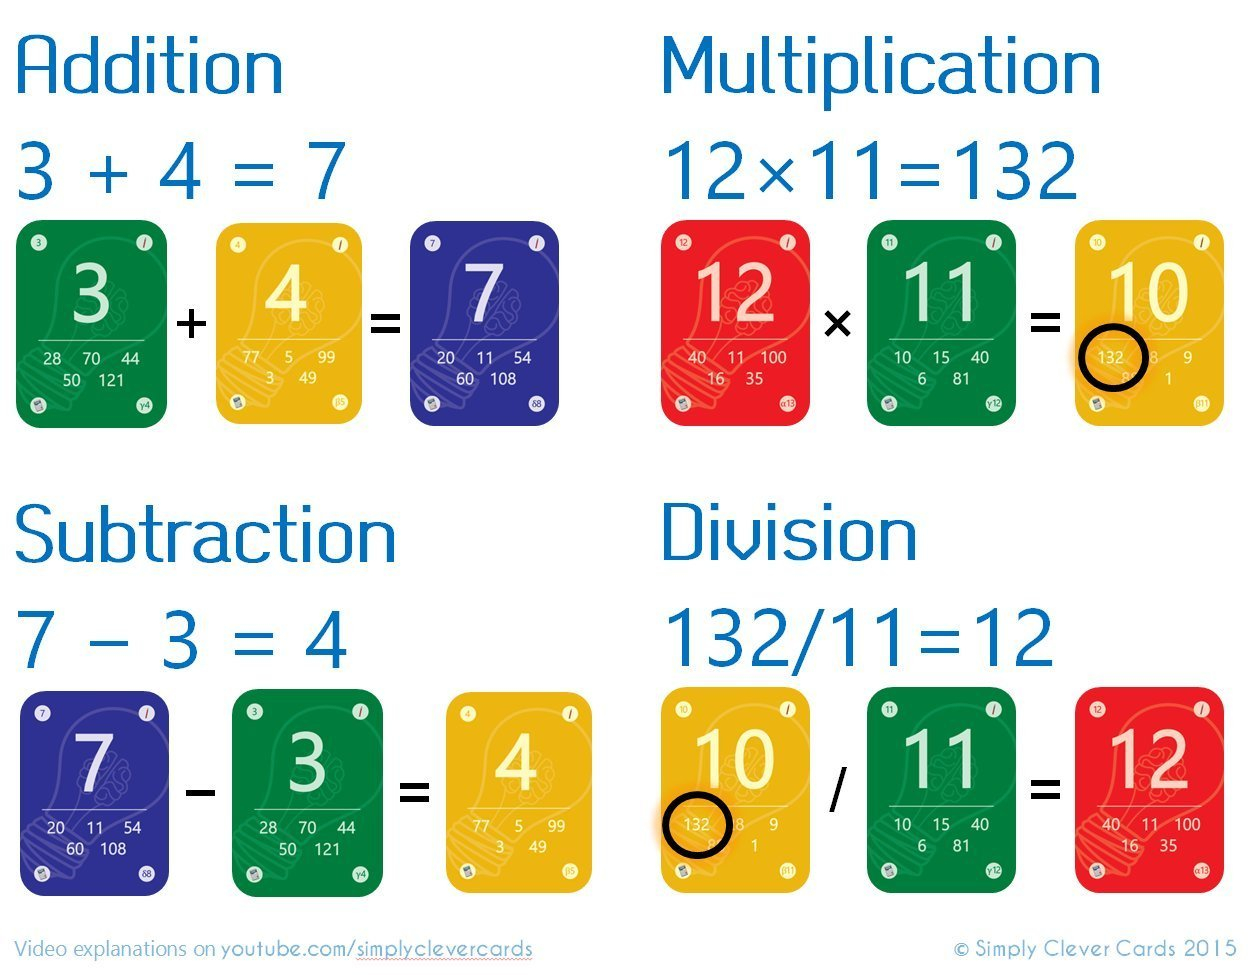 Multiplication And Division Flash Cards: Cool Math Games